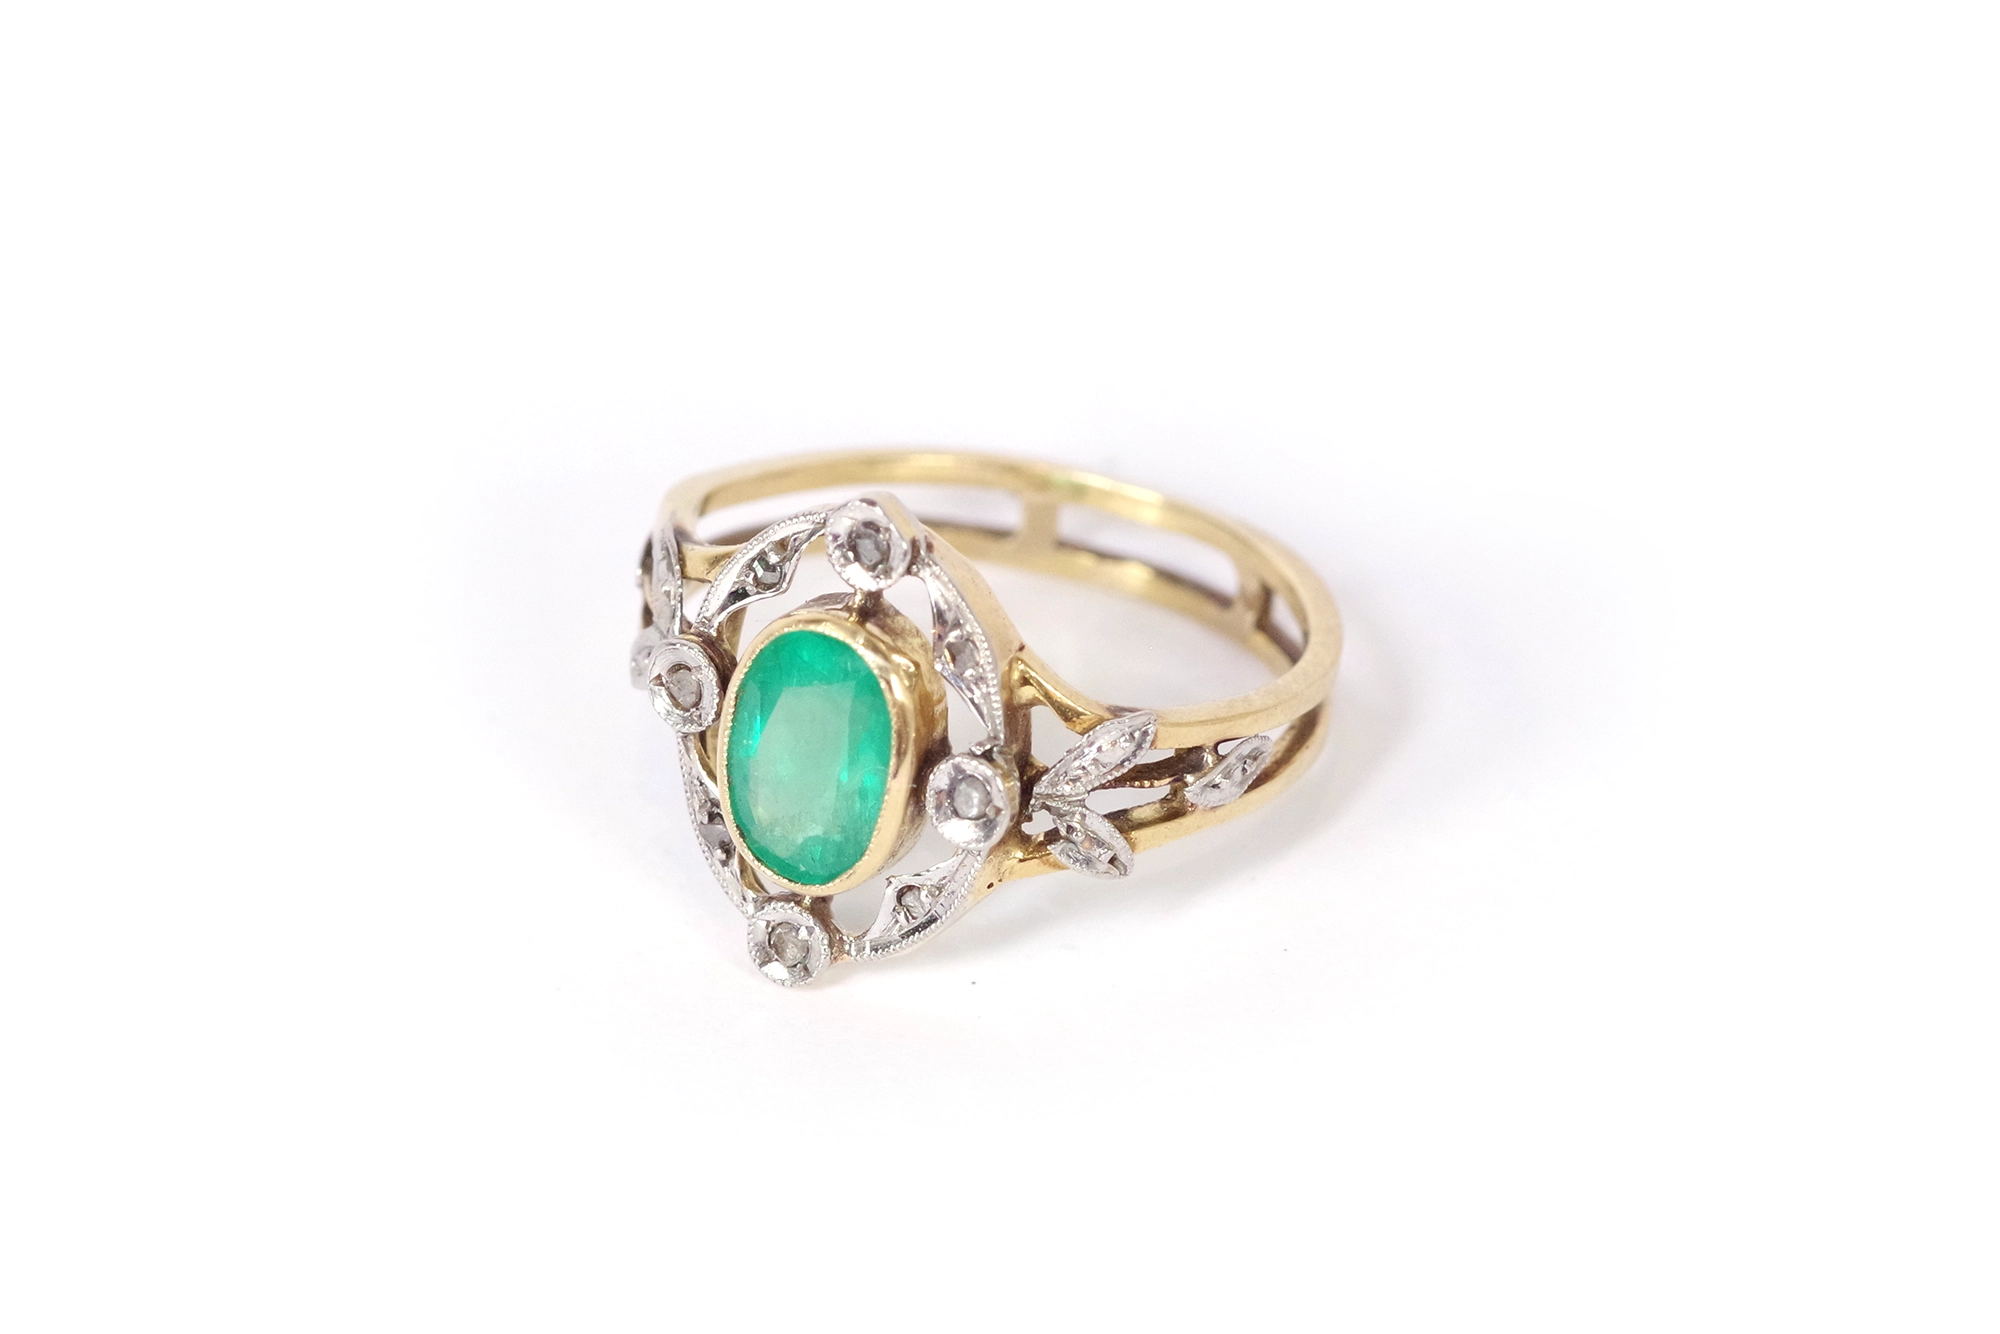 Vintage Inspired Emerald Engagement Ring with Diamond Halo | Rare Earth  Jewelry